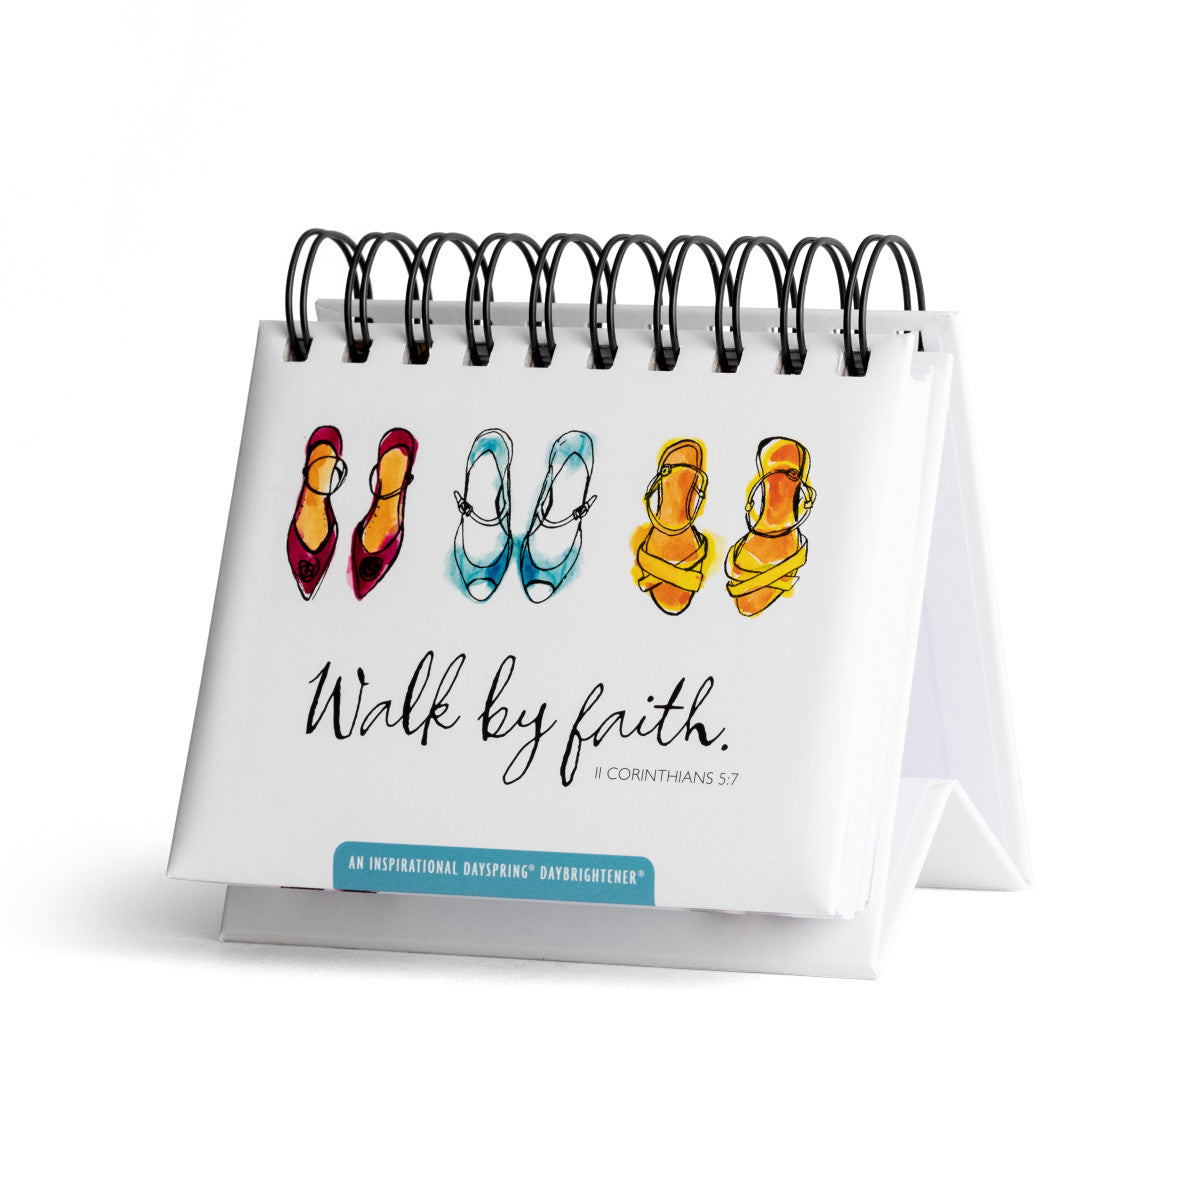 Walk By Faith - 365 Day Inspirational DayBrightener - The Christian Gift Company